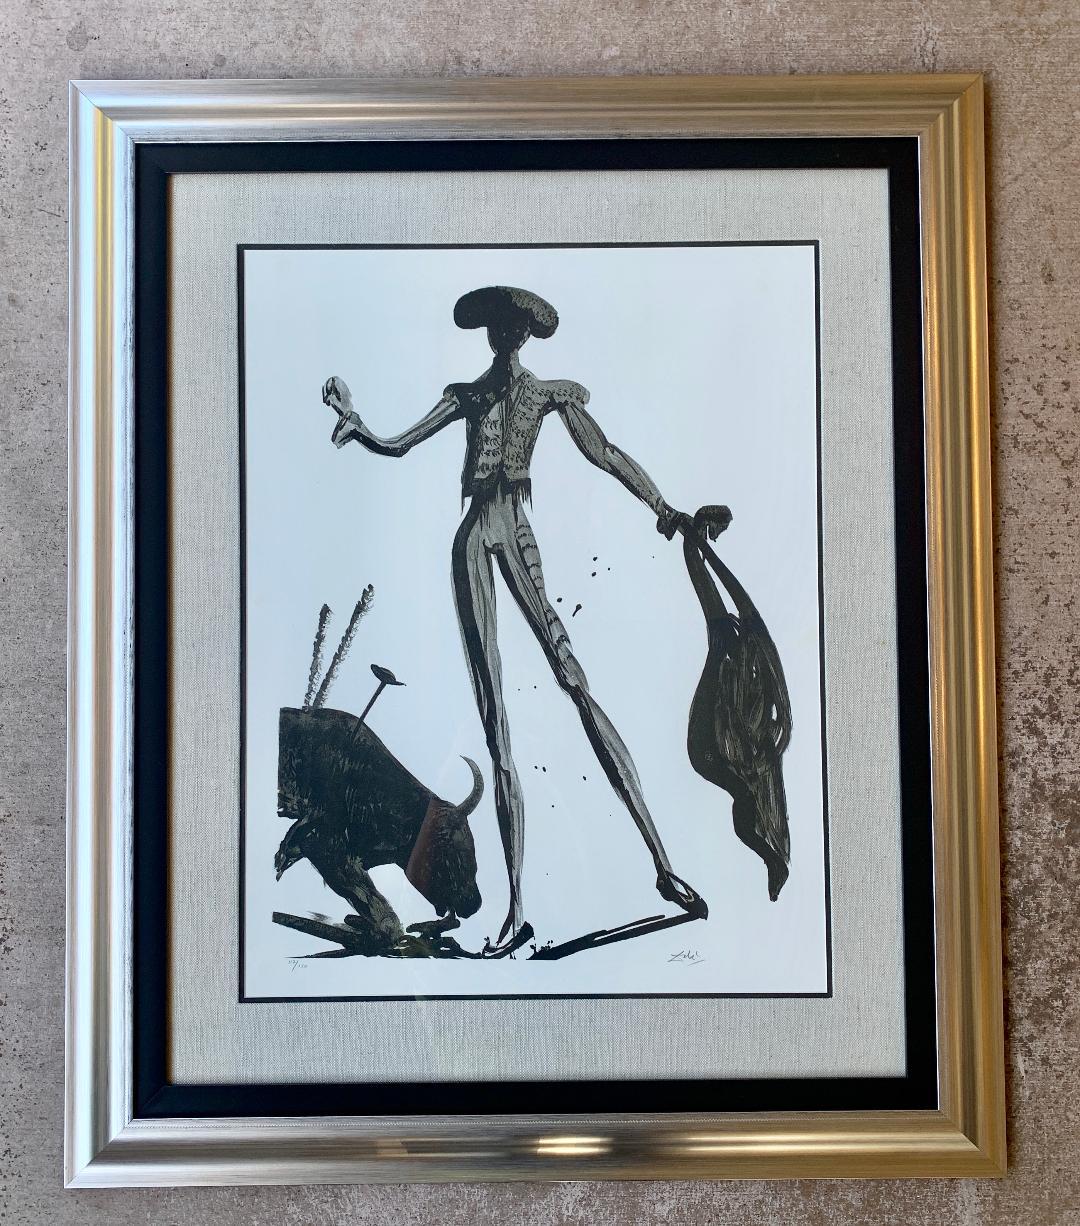 Torero Noir Circa 1969 (or Black Bullfight) is a limited edition of 150 lithographs, hand signed, monochromatic black and gray lithograph on BKF Rives paper of a bullfighter slaying a bull by the world famous, deceased flamboyant Spanish Surrealist